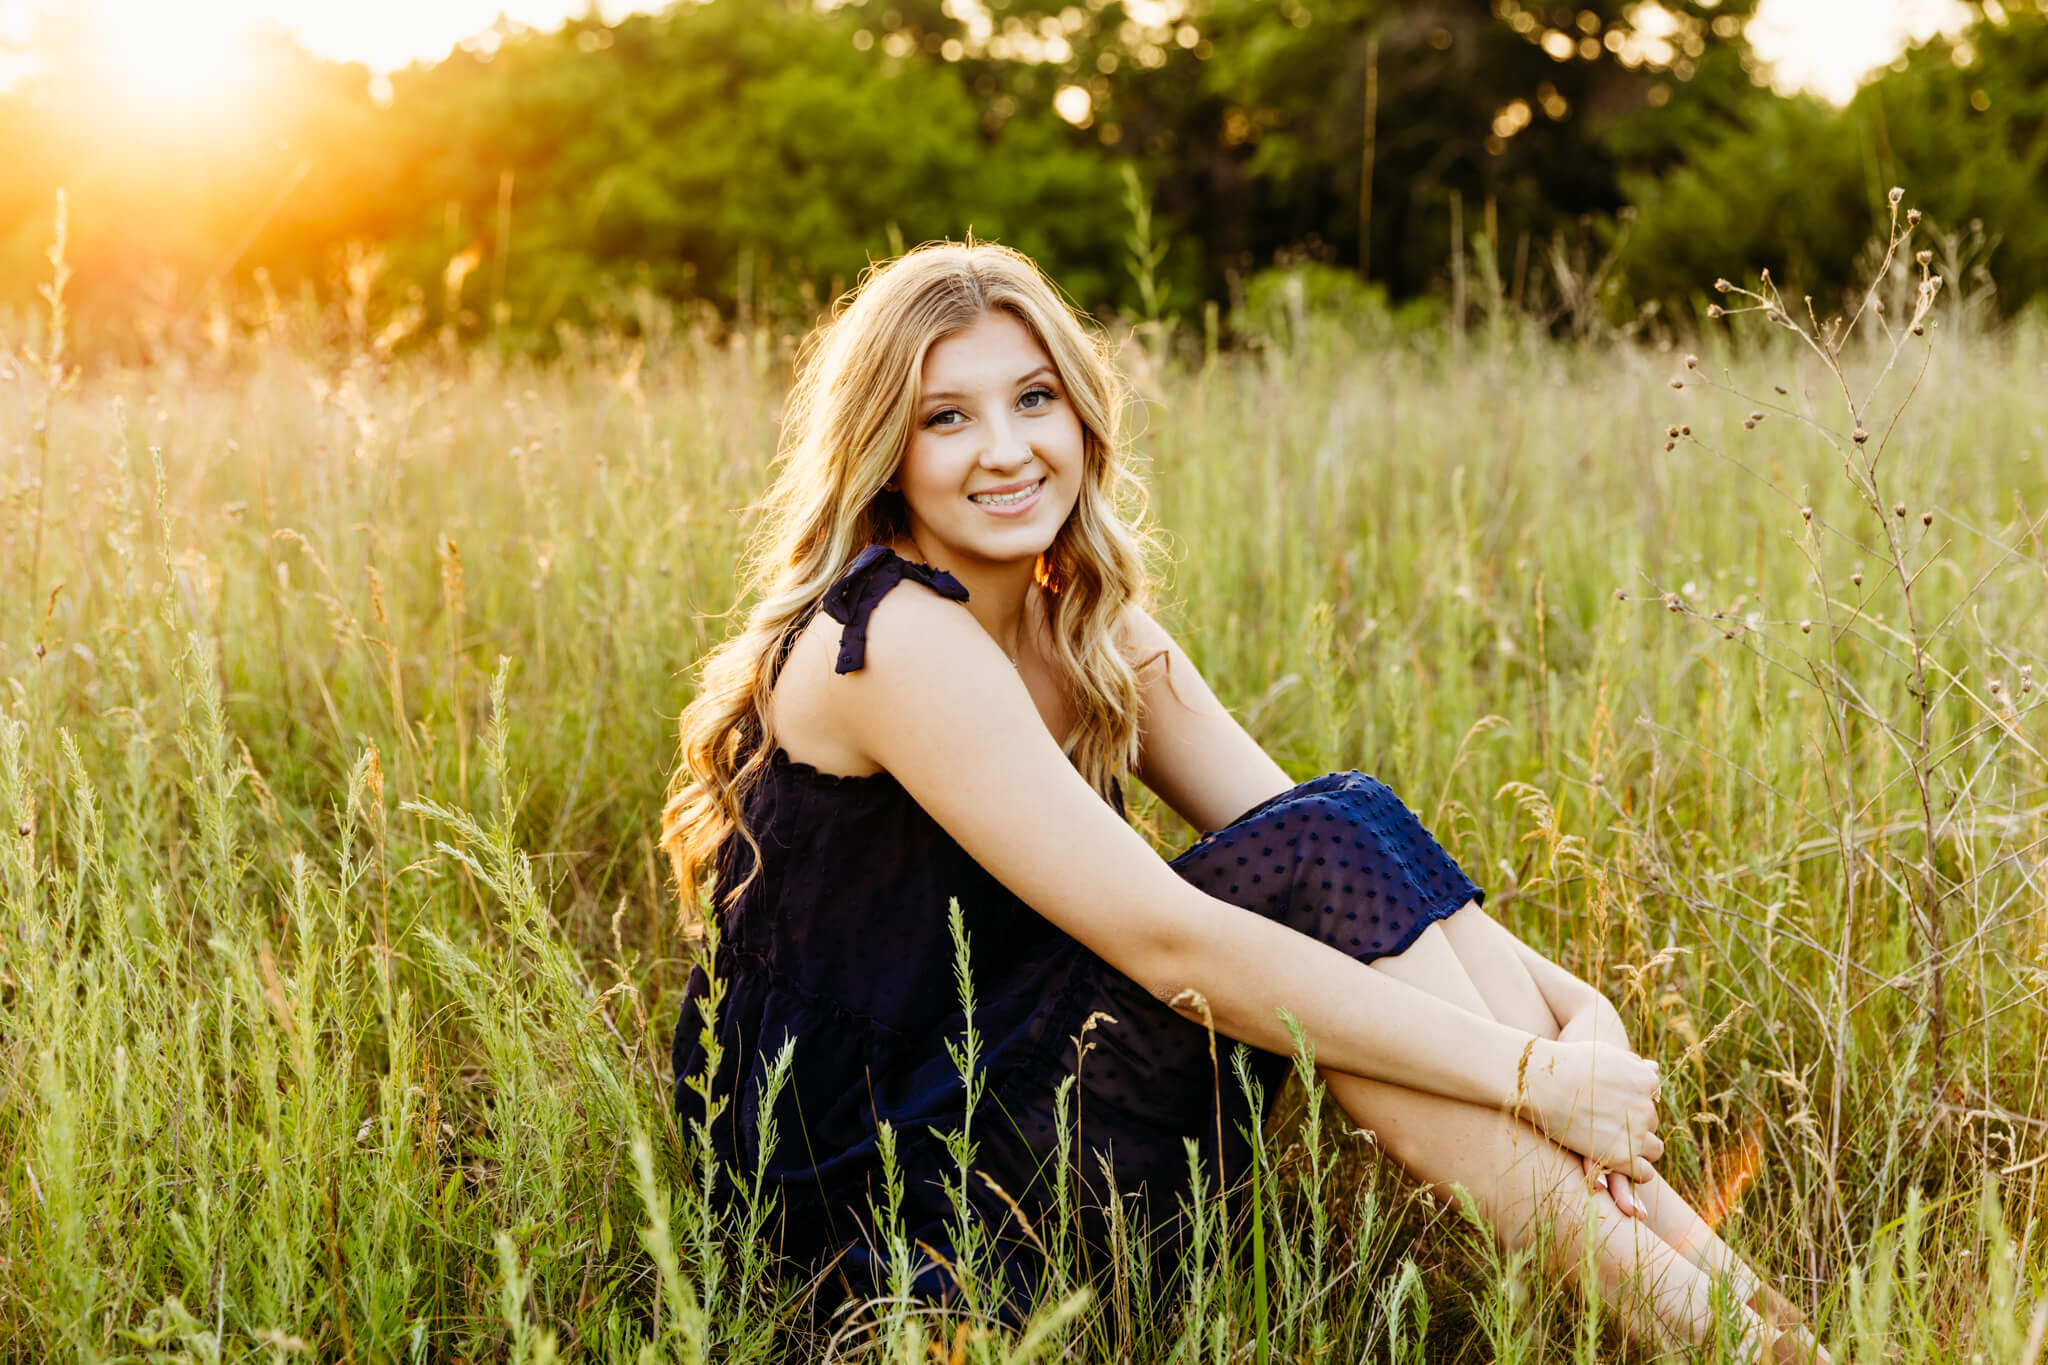 stunning high school girl sitting in the grass at sunset and smiling